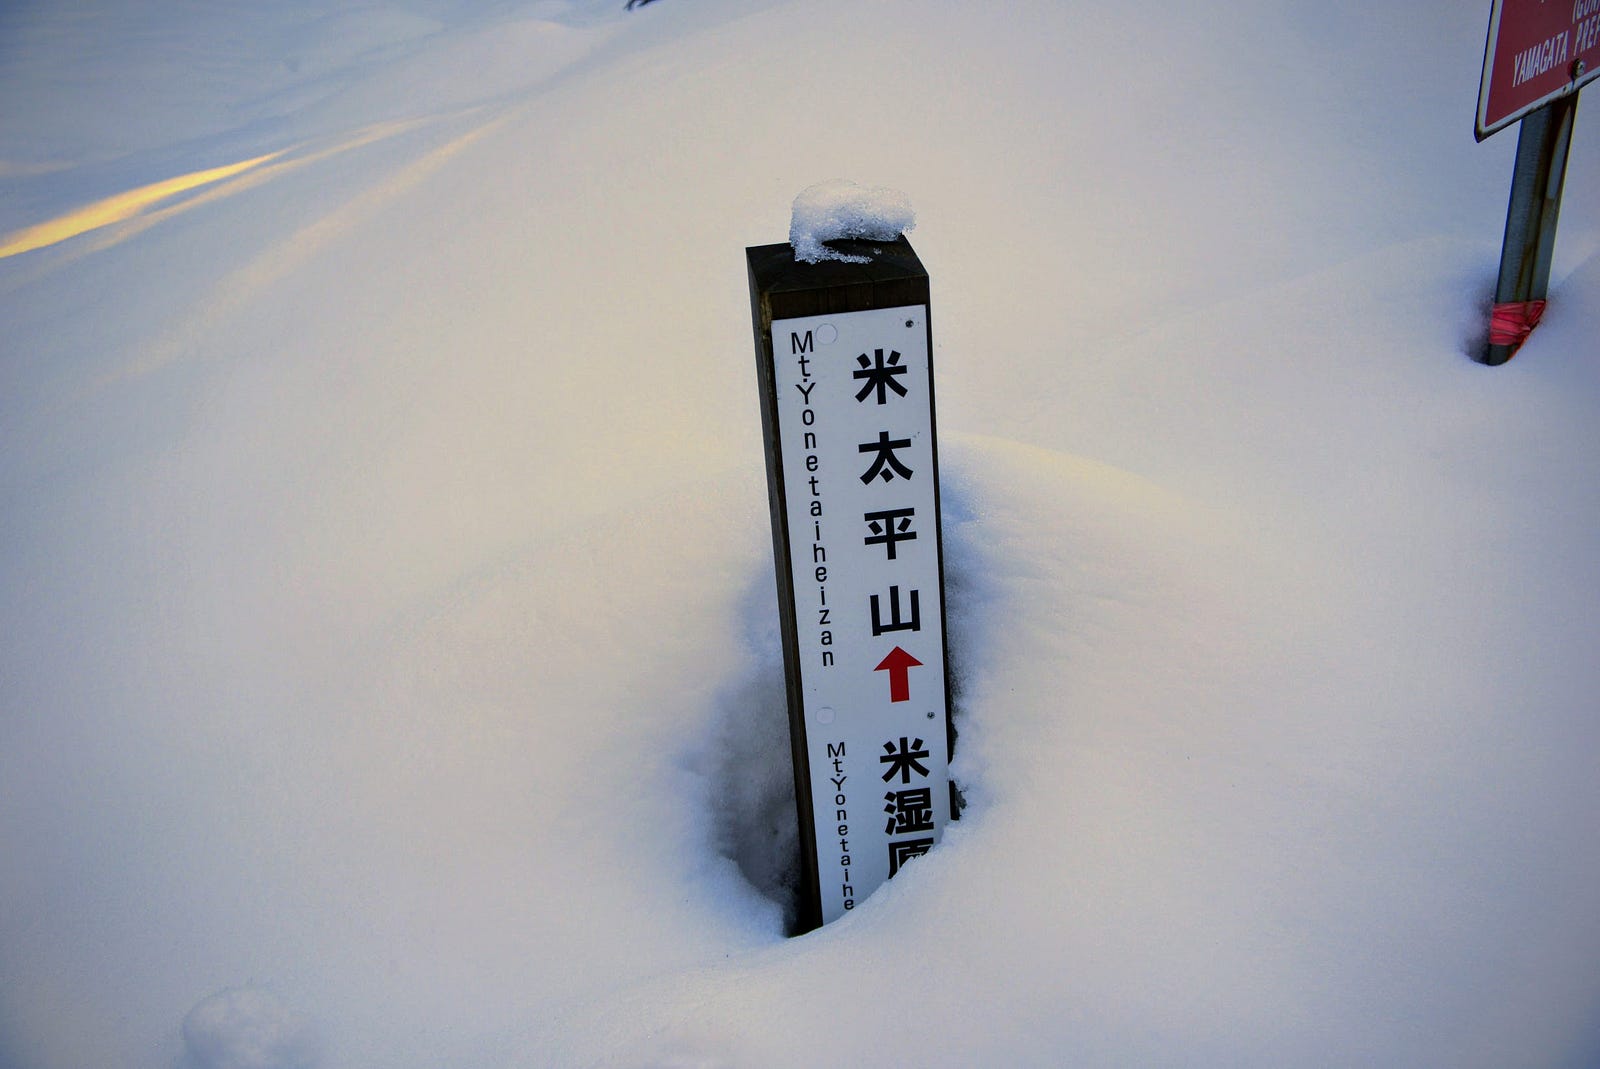 A sign on Mt. Yonetaihei buried in snow